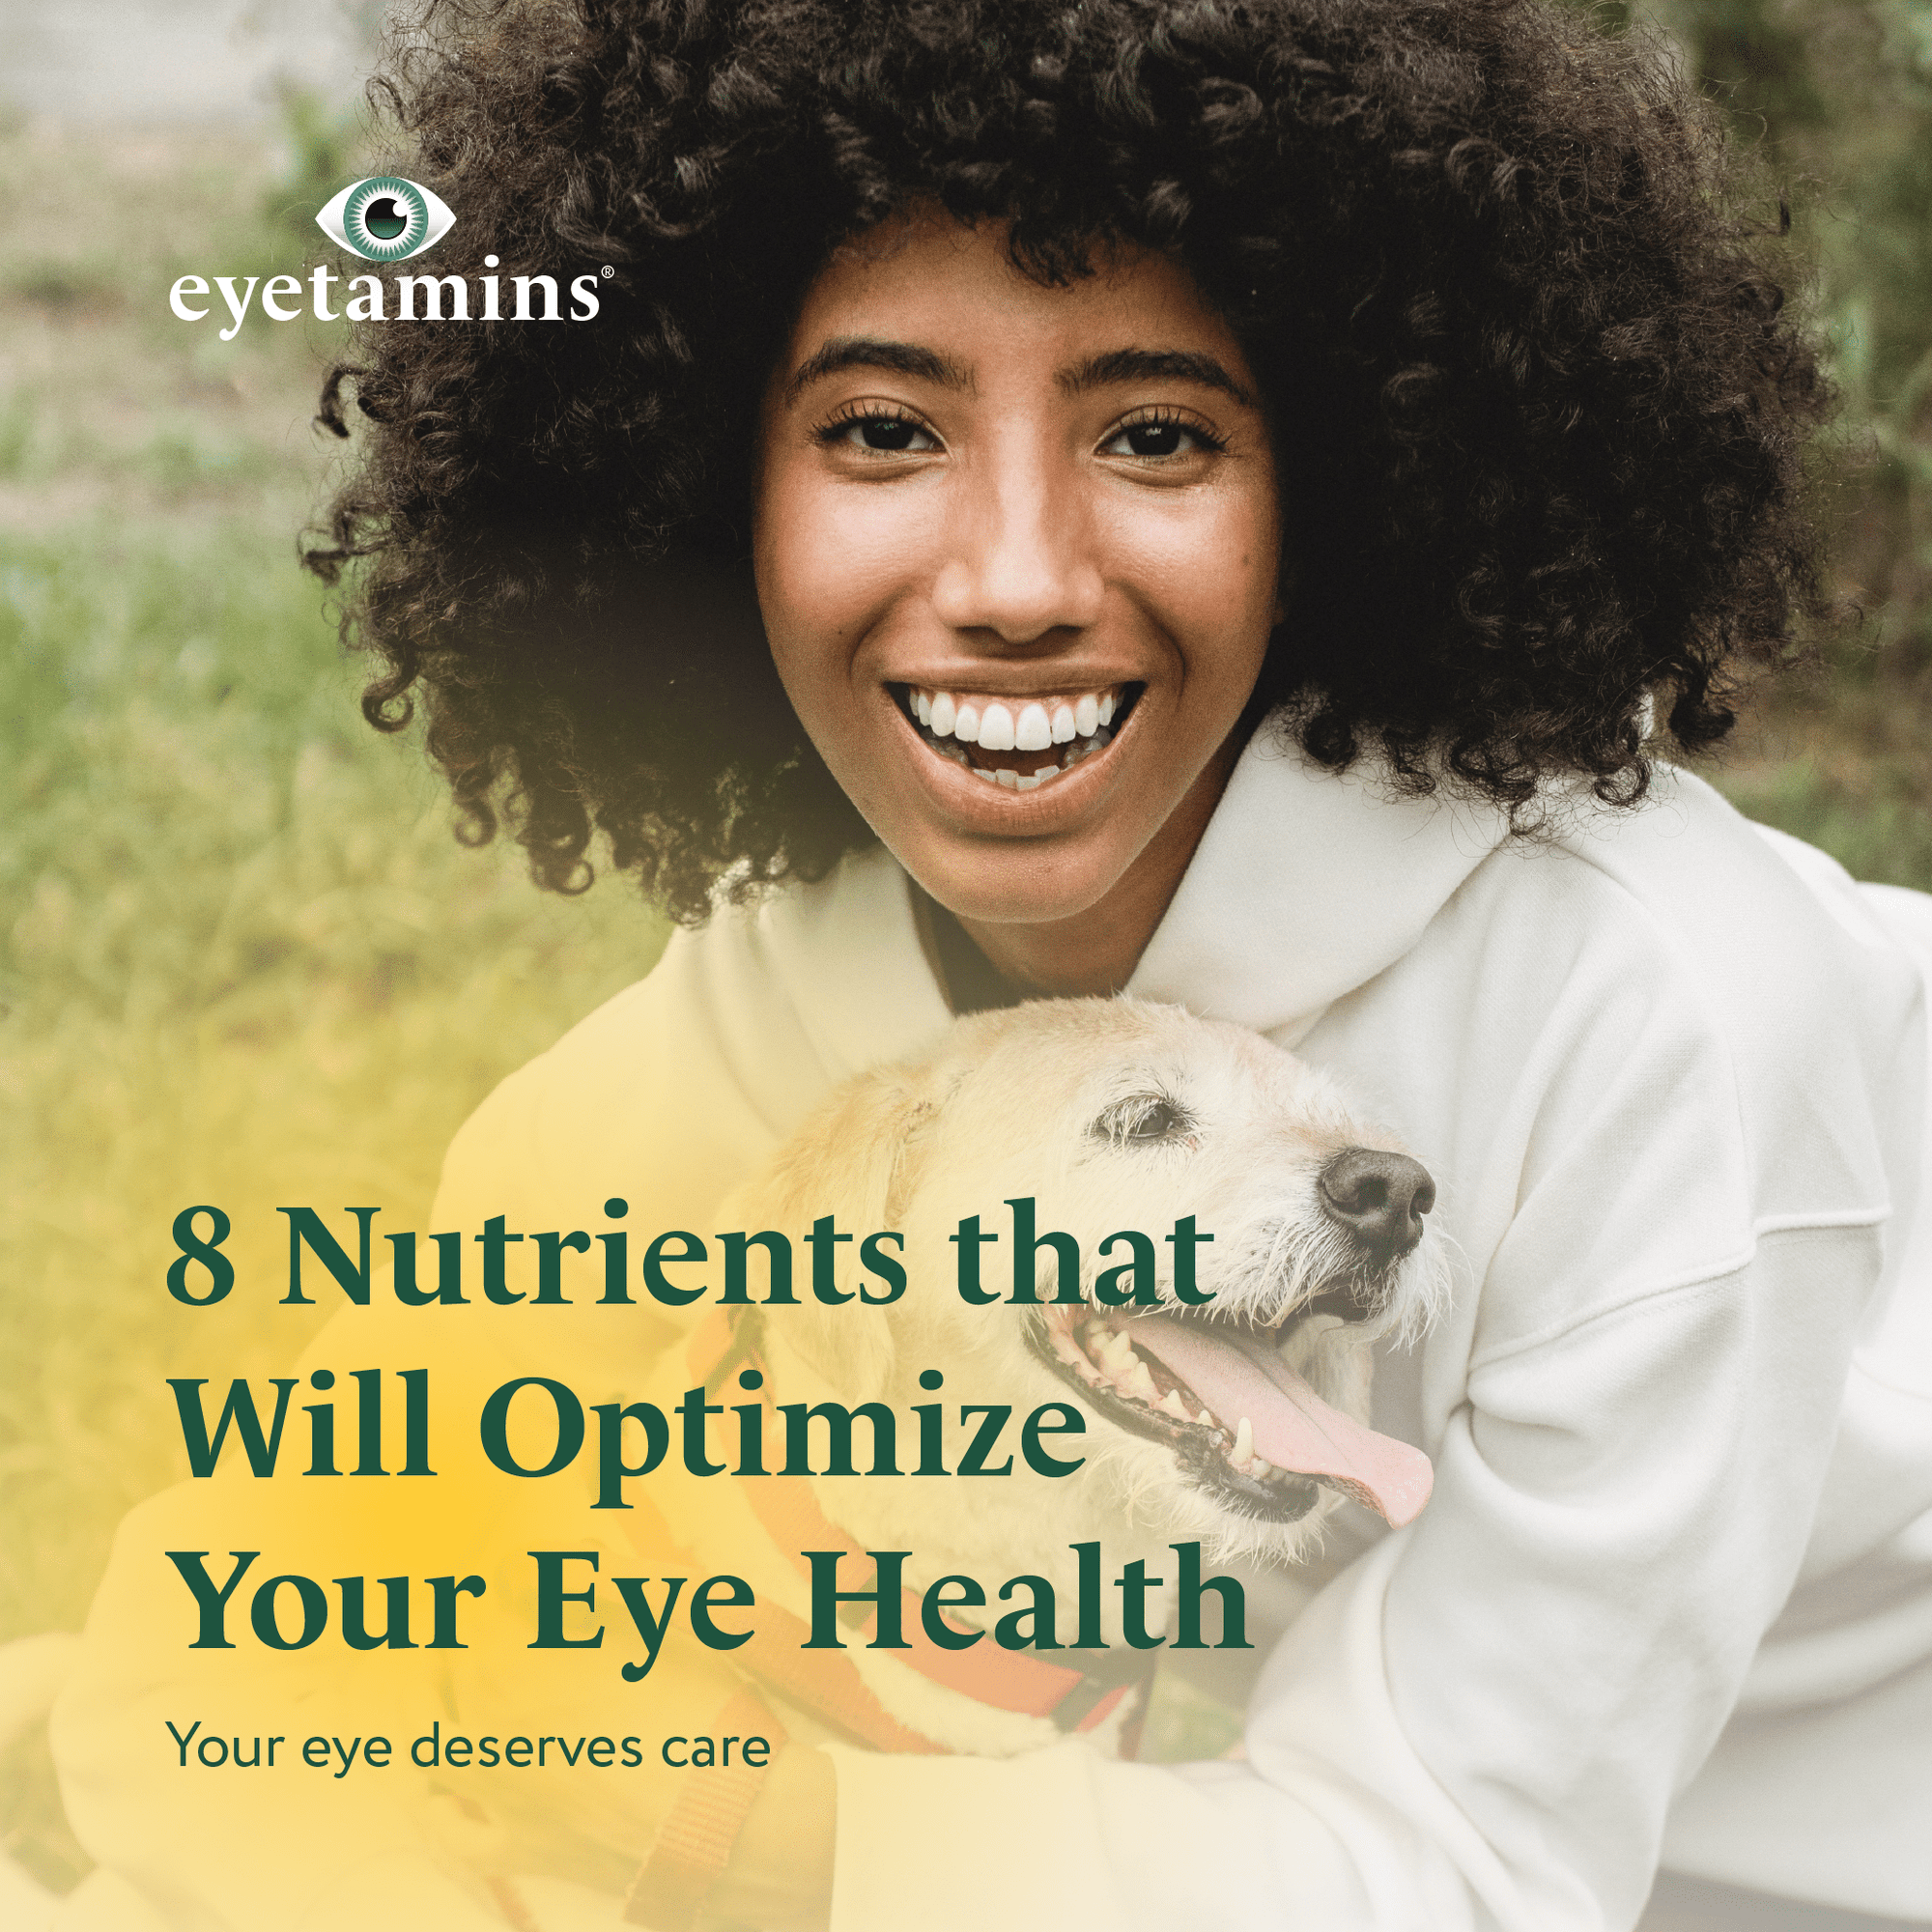 Eyetamins - 8 Nutrients that Will Optimize Your Eye Health